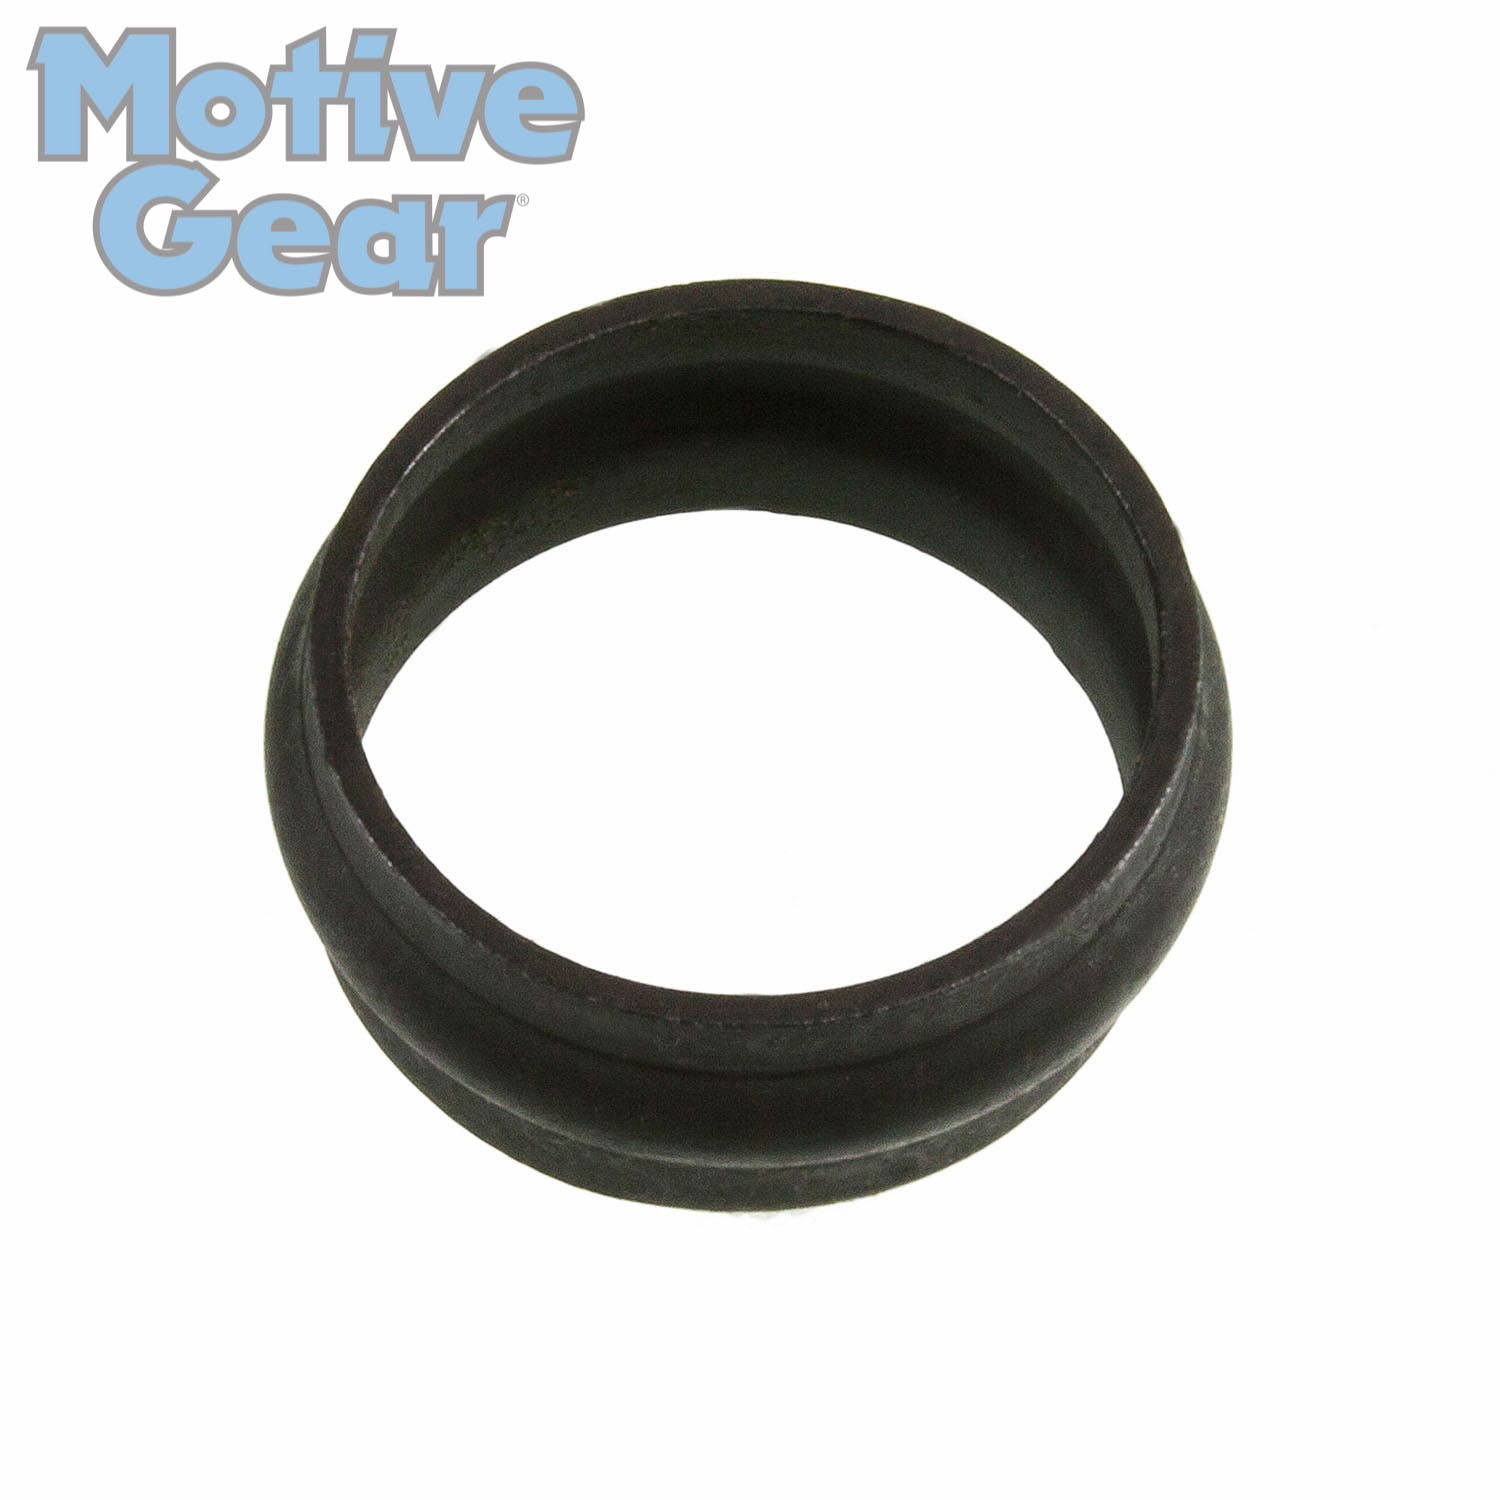 Motive Gear 9785792 Differential Crush Sleeve